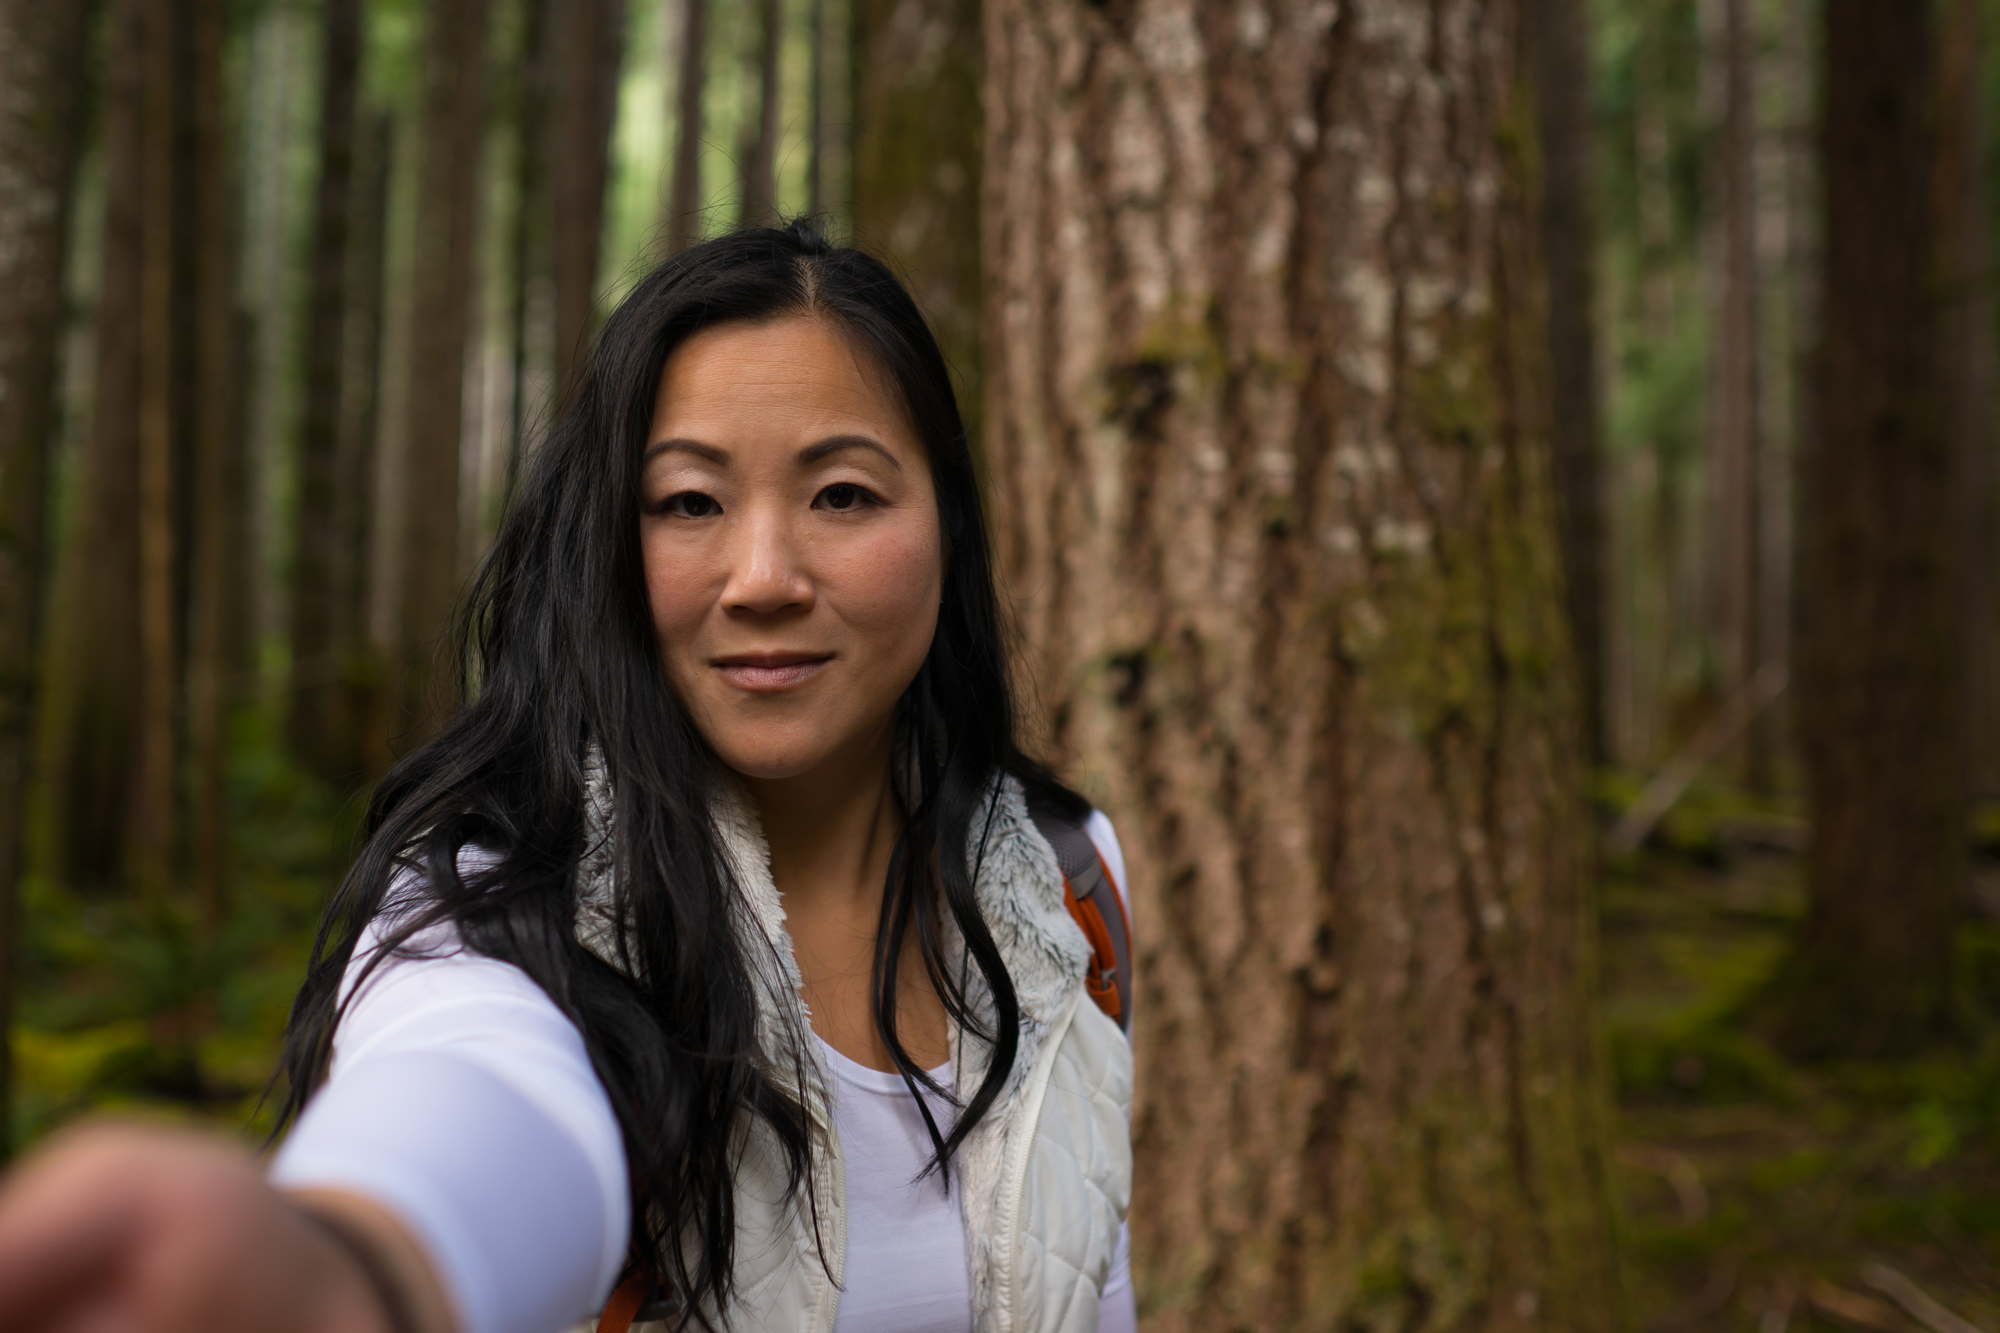 A woman with long dark hair reaches towards the camera during an outdoor portrait photo shoot